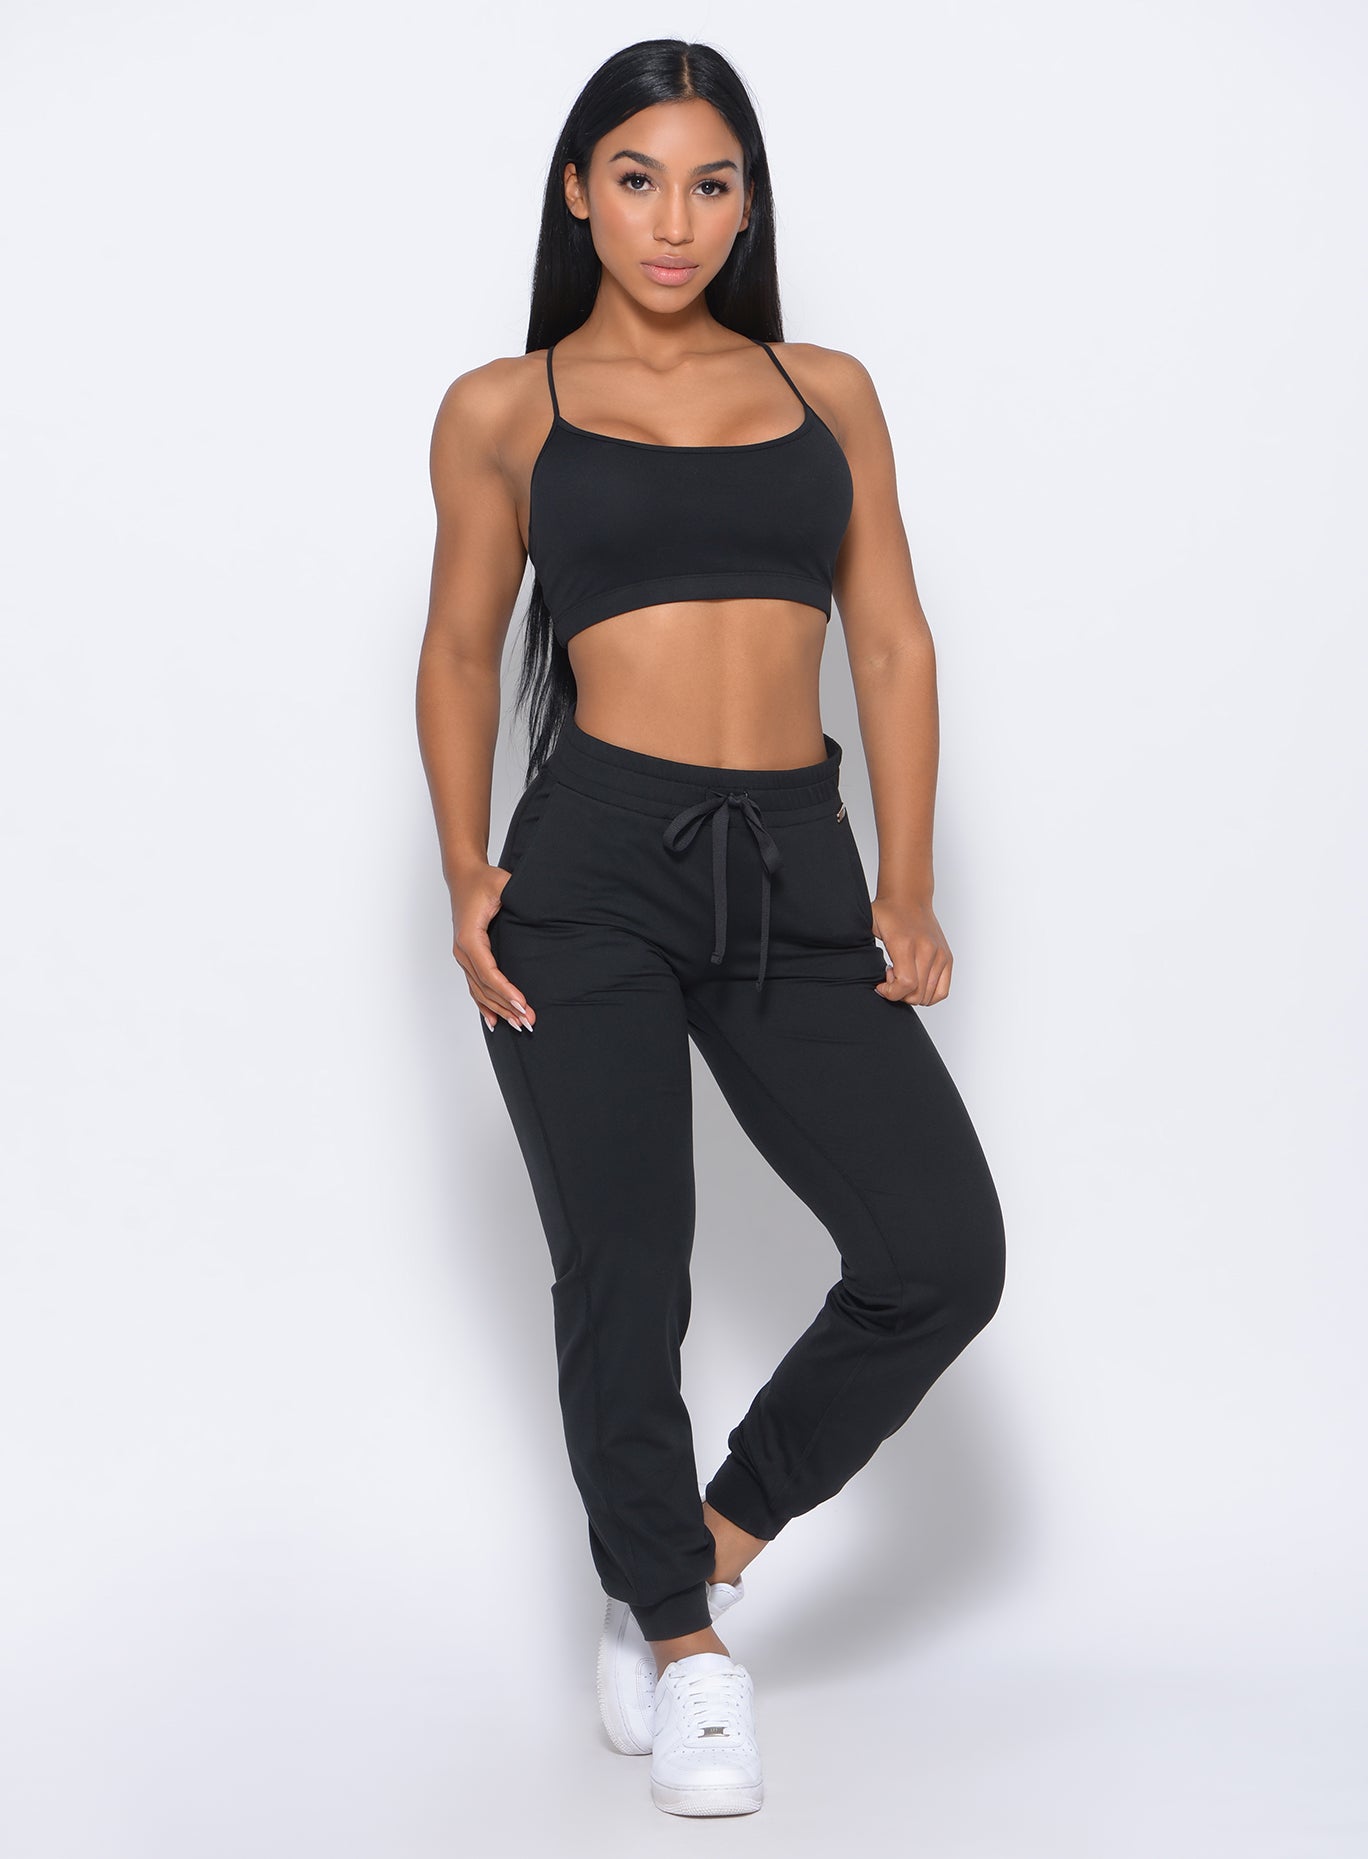 Model facing forward wearing our black Relax Sports Bra and a matching joggers